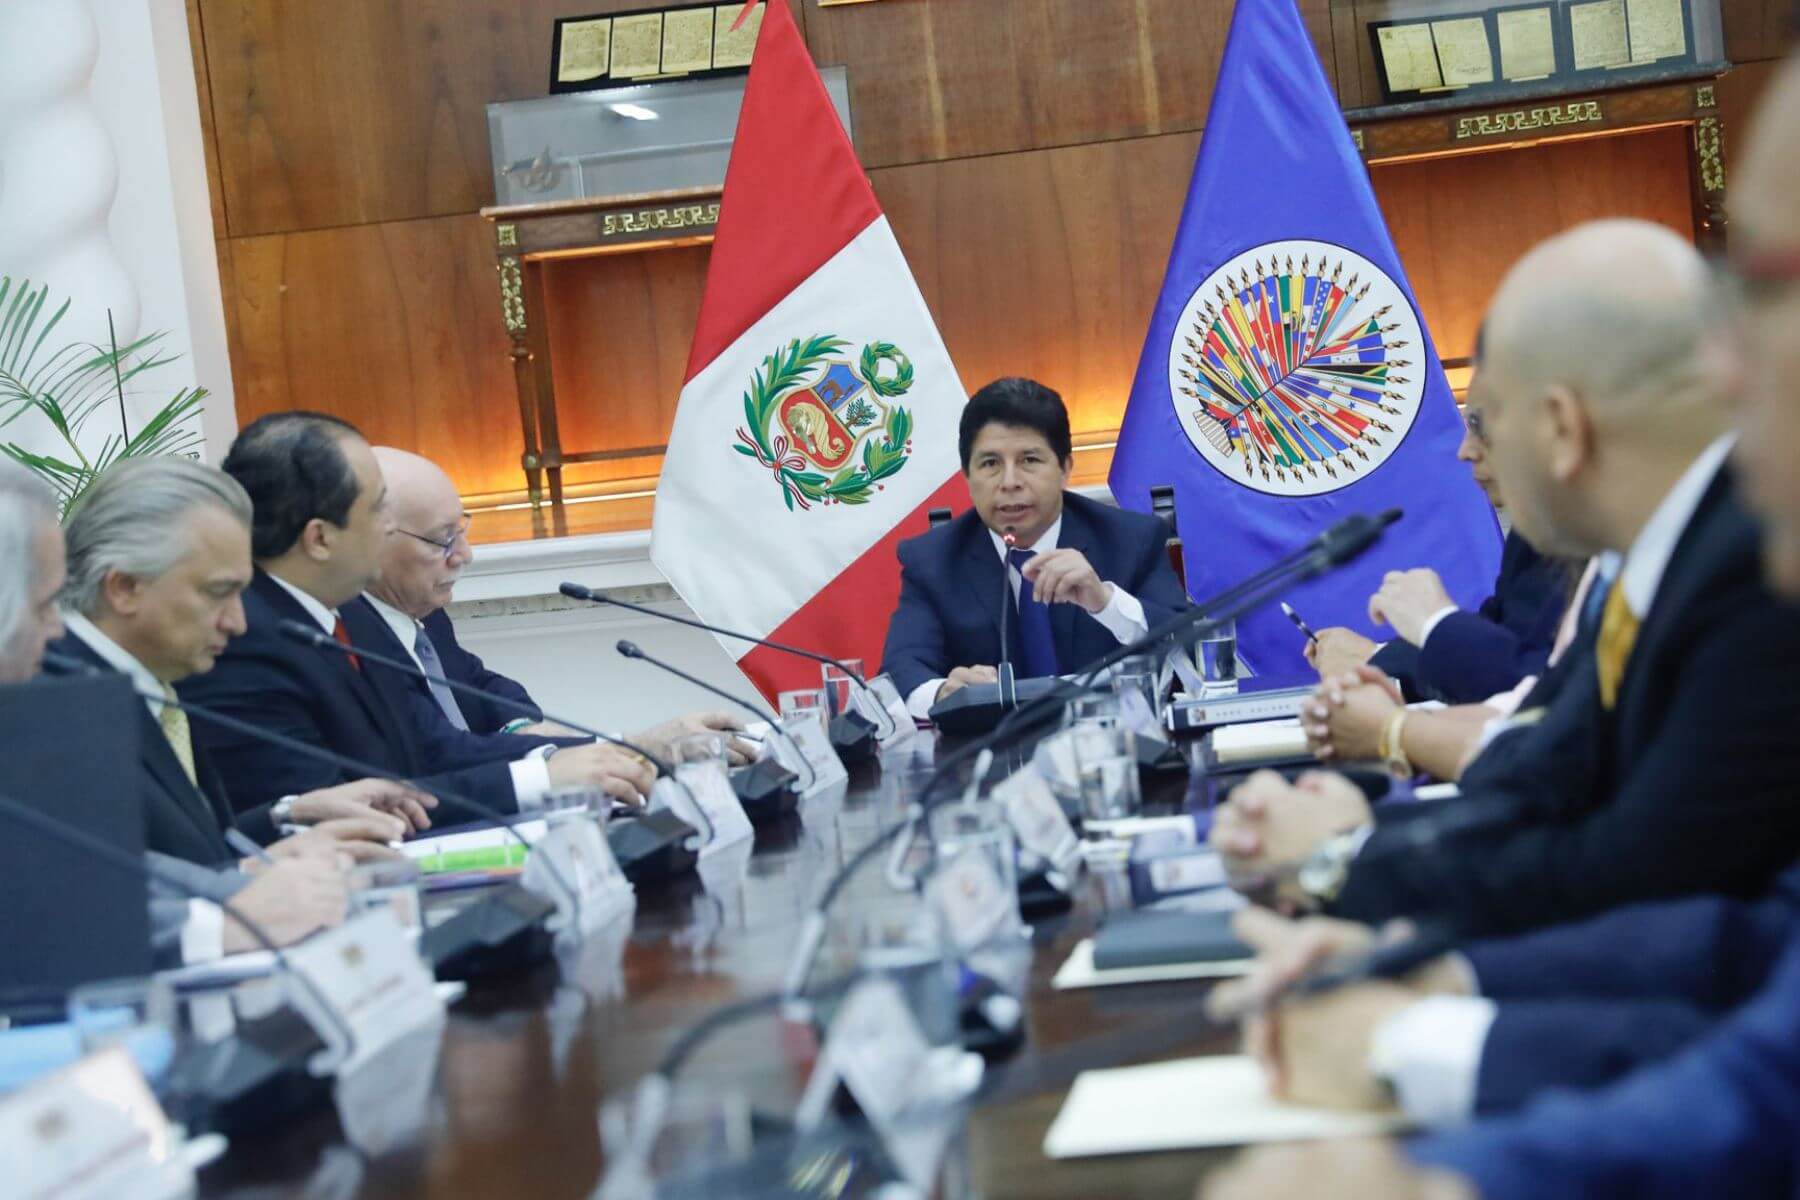 Peru waiting for OAS report on political crisis